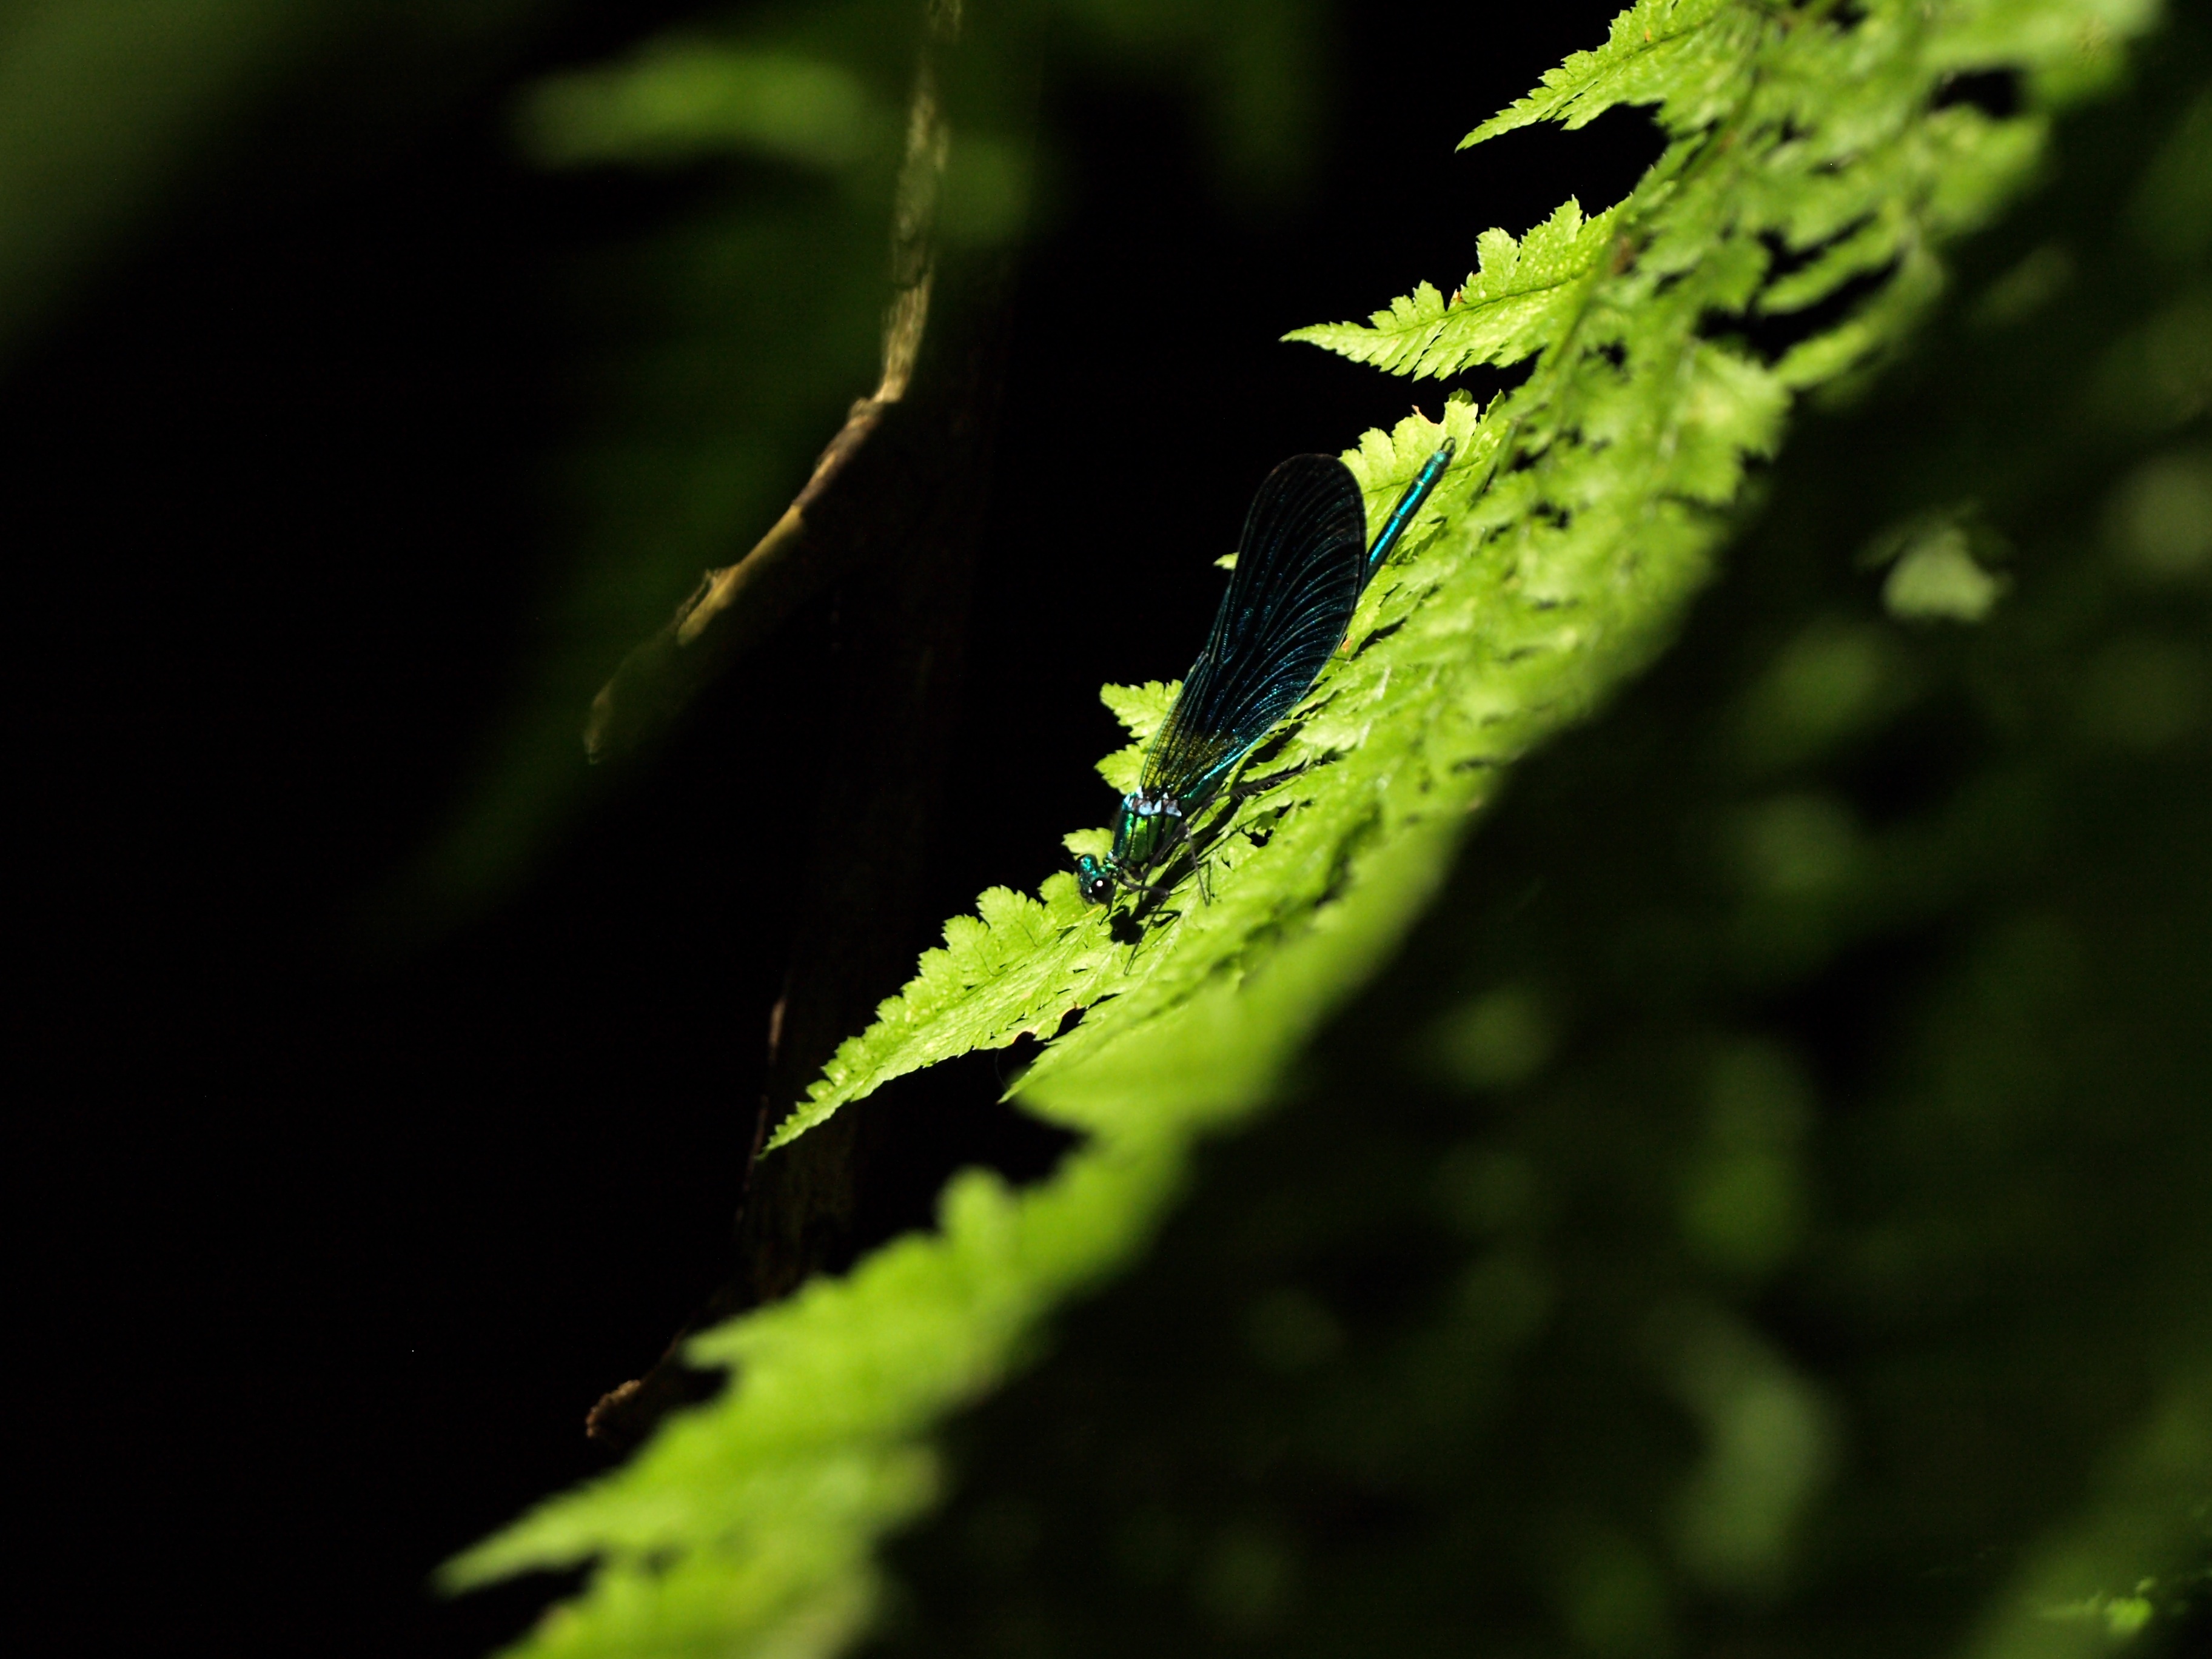 Green Leaves, Fresh, Green, Insect, Leave, HQ Photo